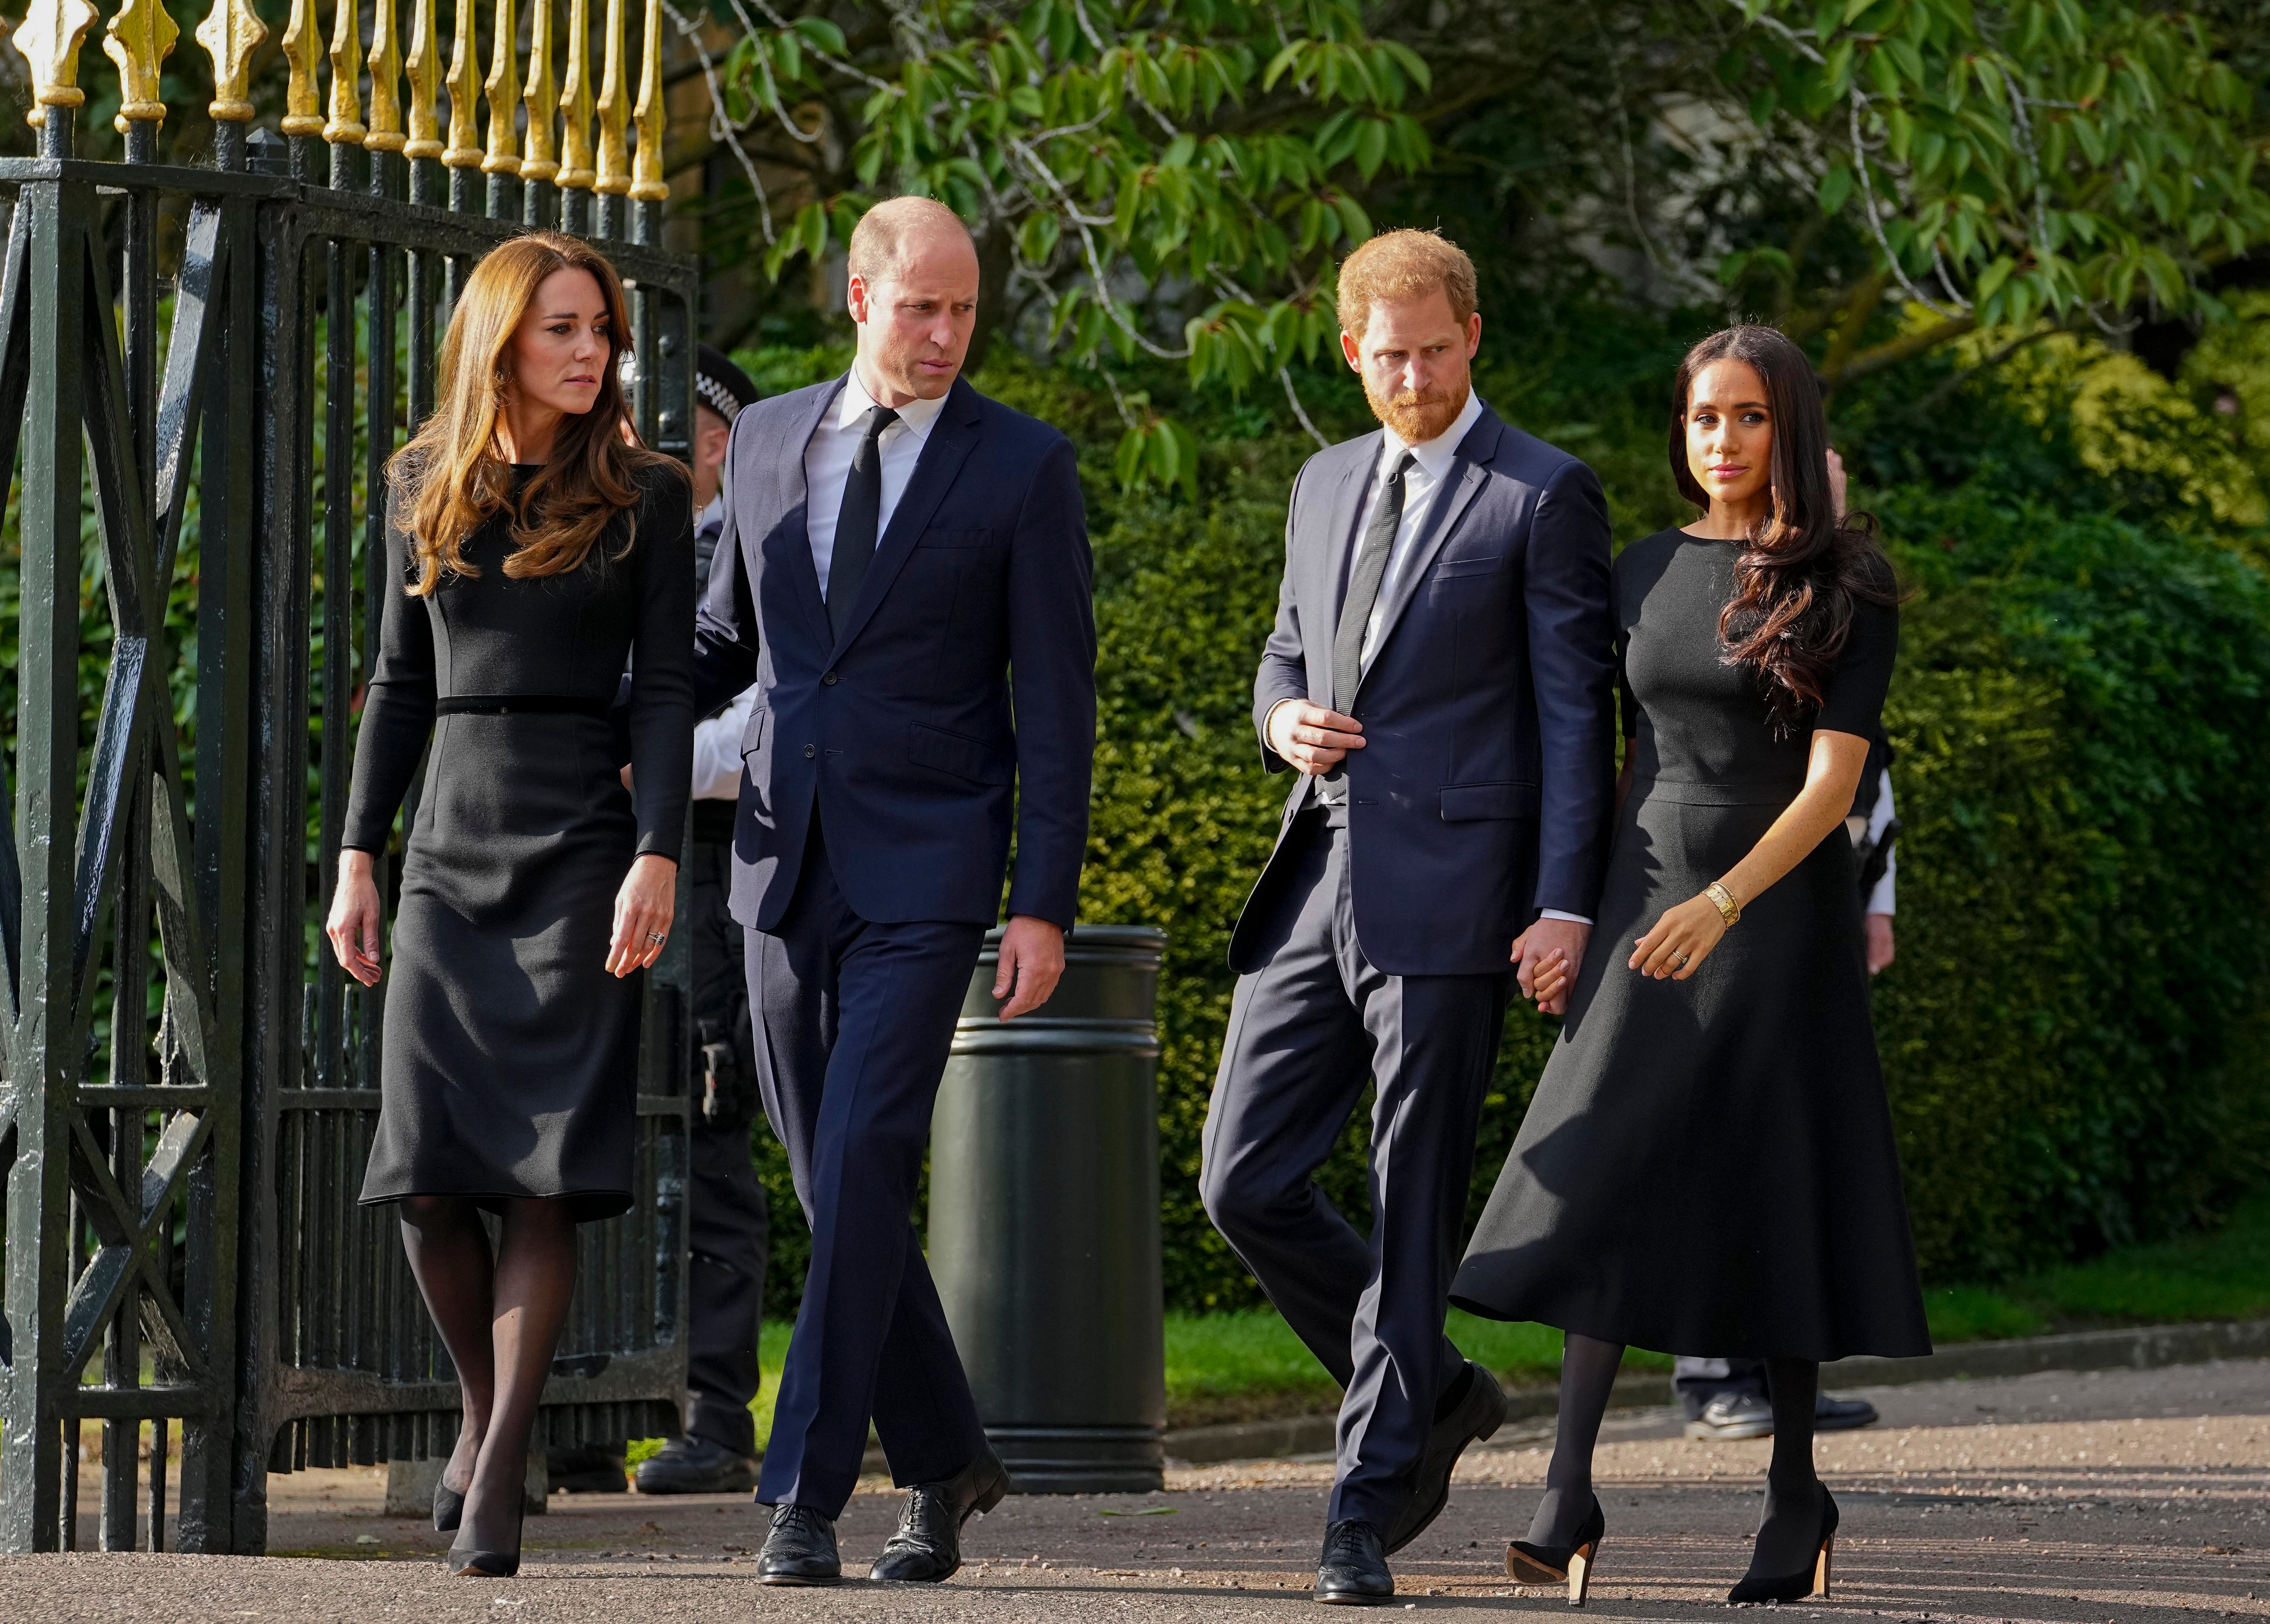 The two couples have not been seen in public together since the death of Queen Elizabeth in September 2022